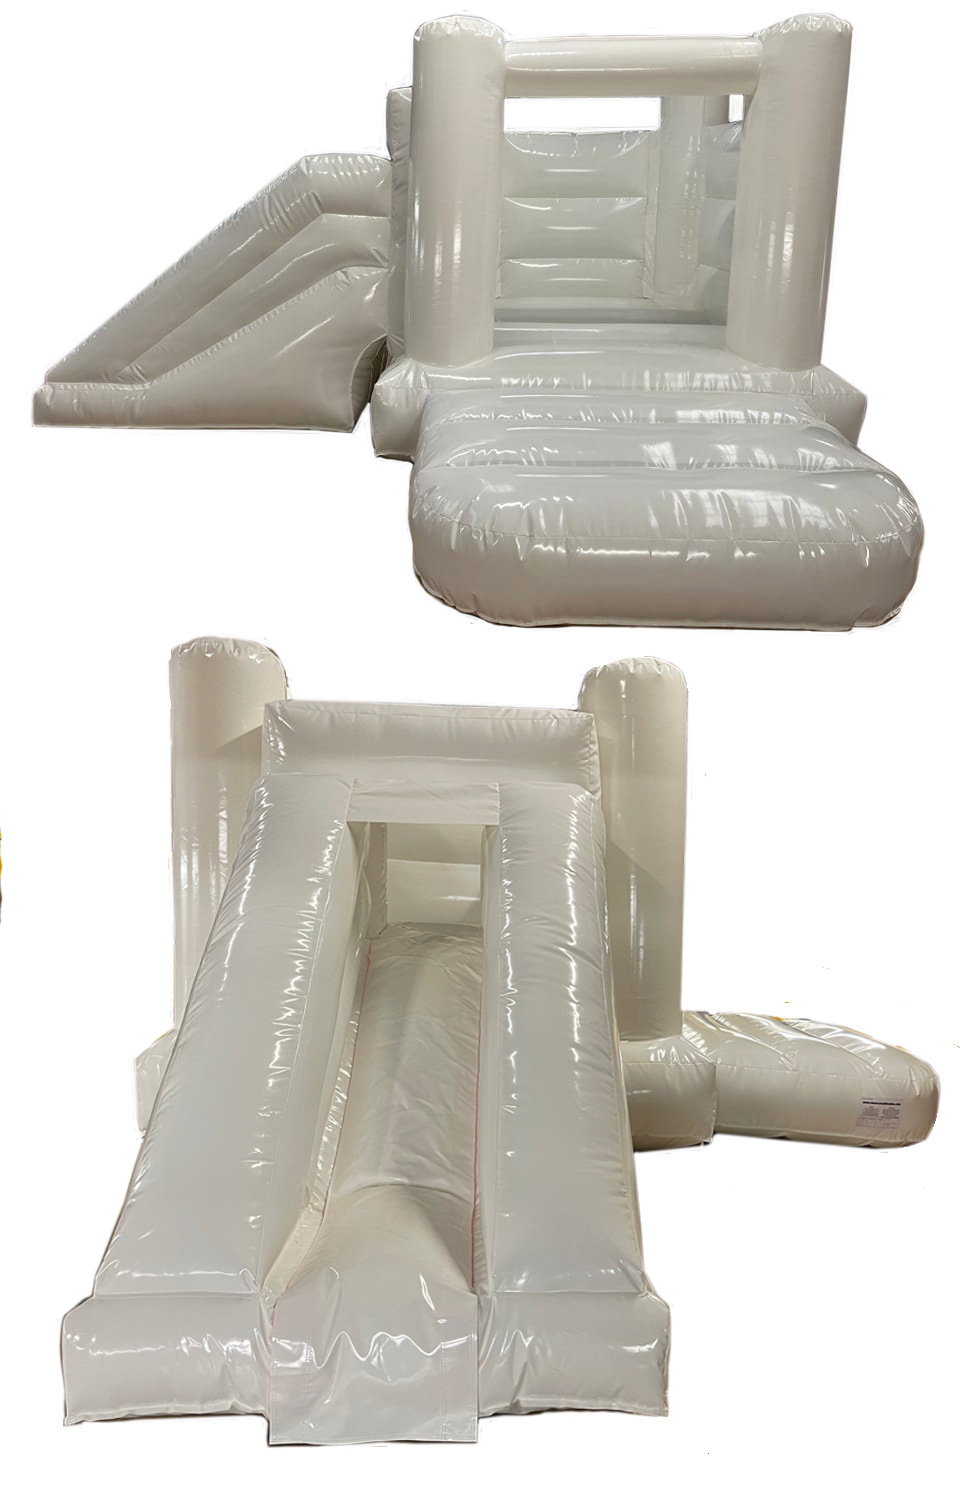 Bouncy Castle Sales - BC654 - Bouncy Inflatable for sale